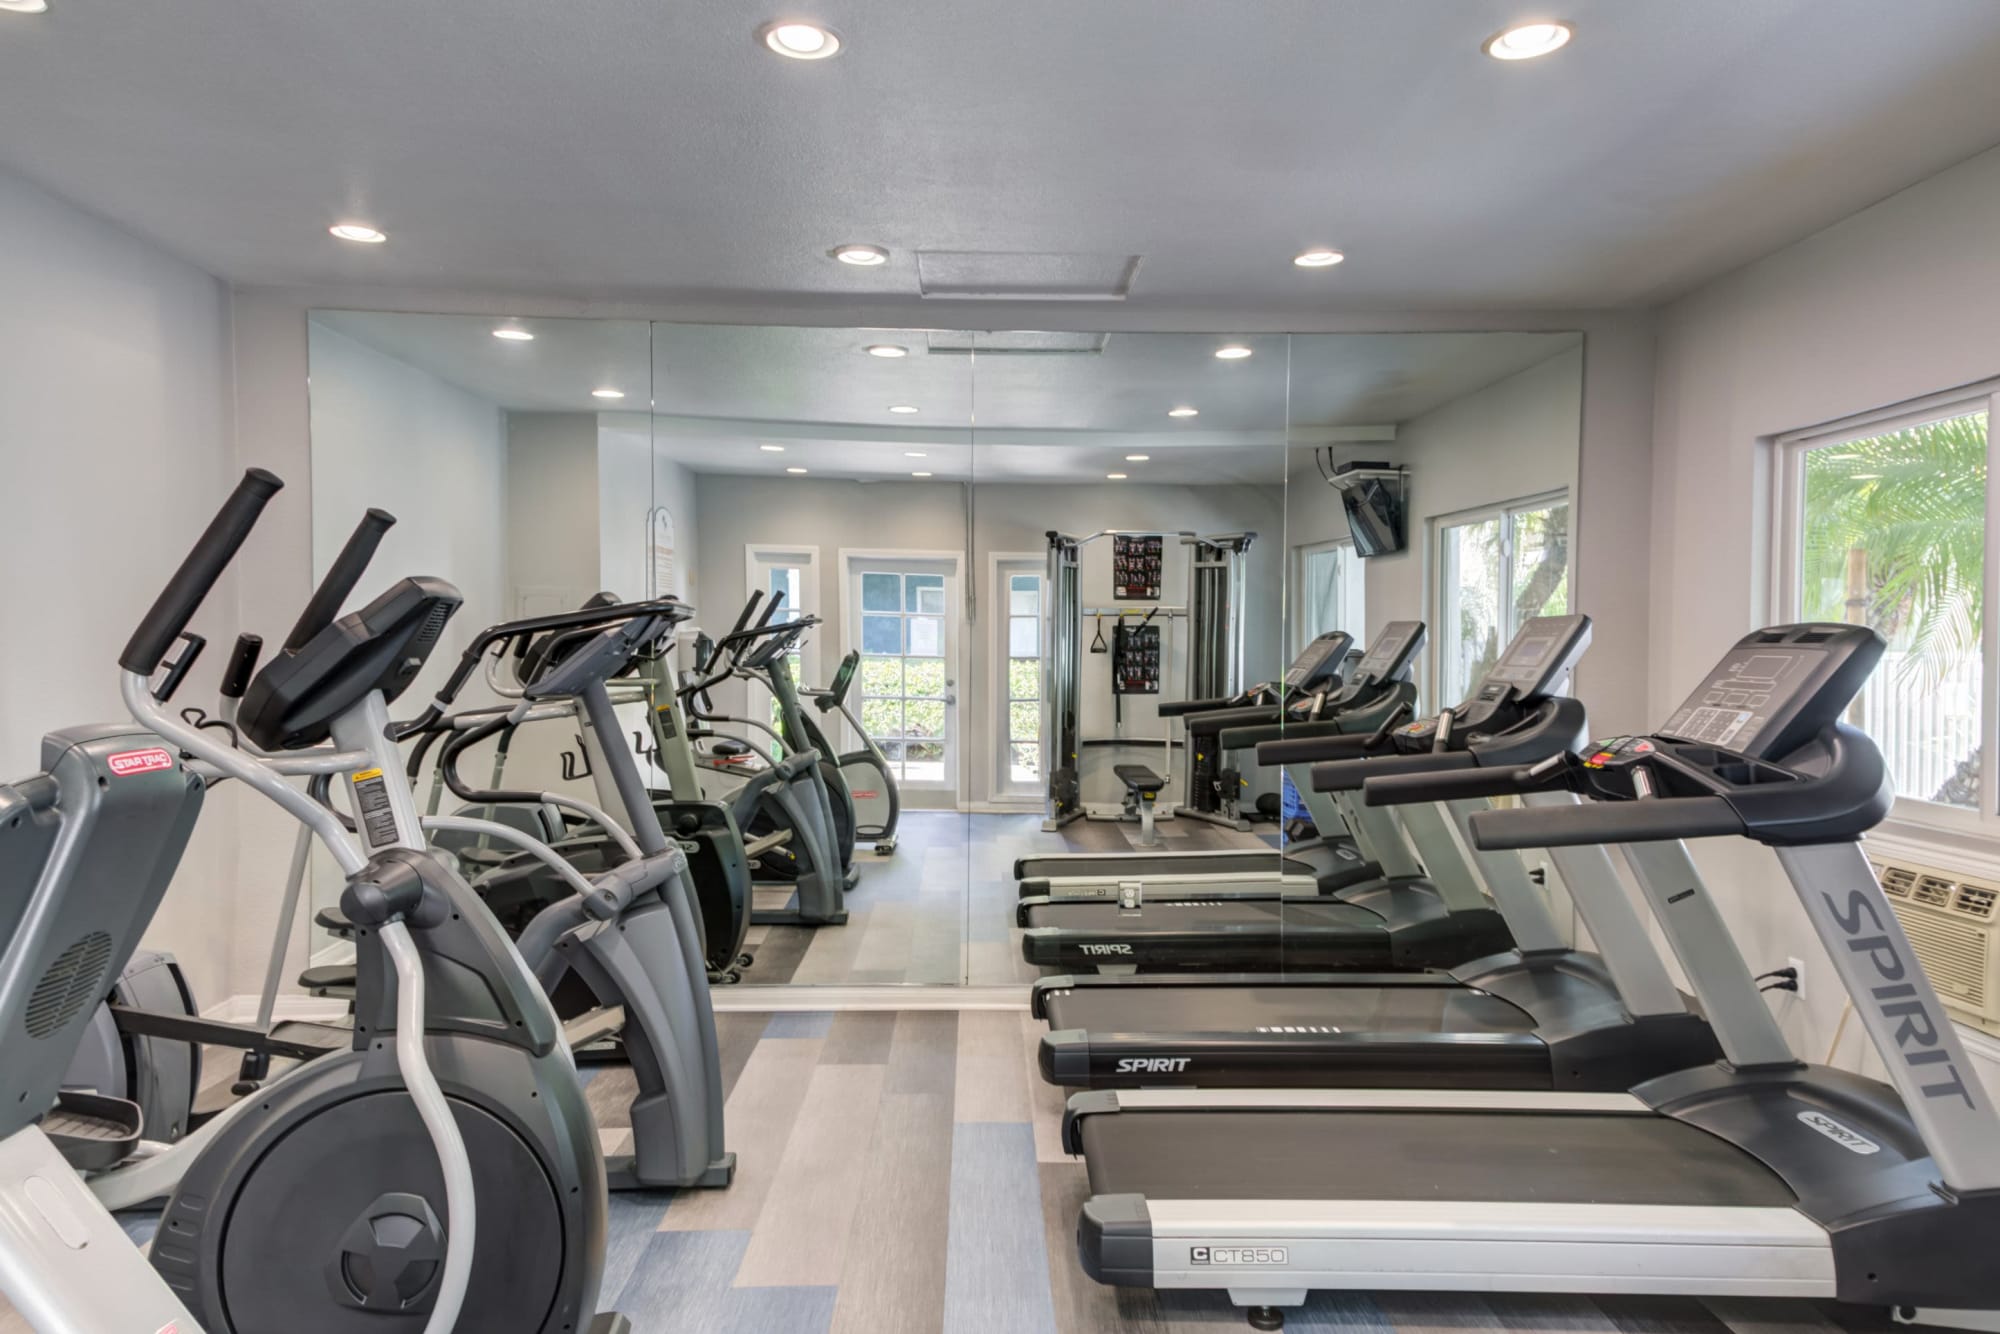 The fitness center at Kendallwood Apartments in Whittier, California